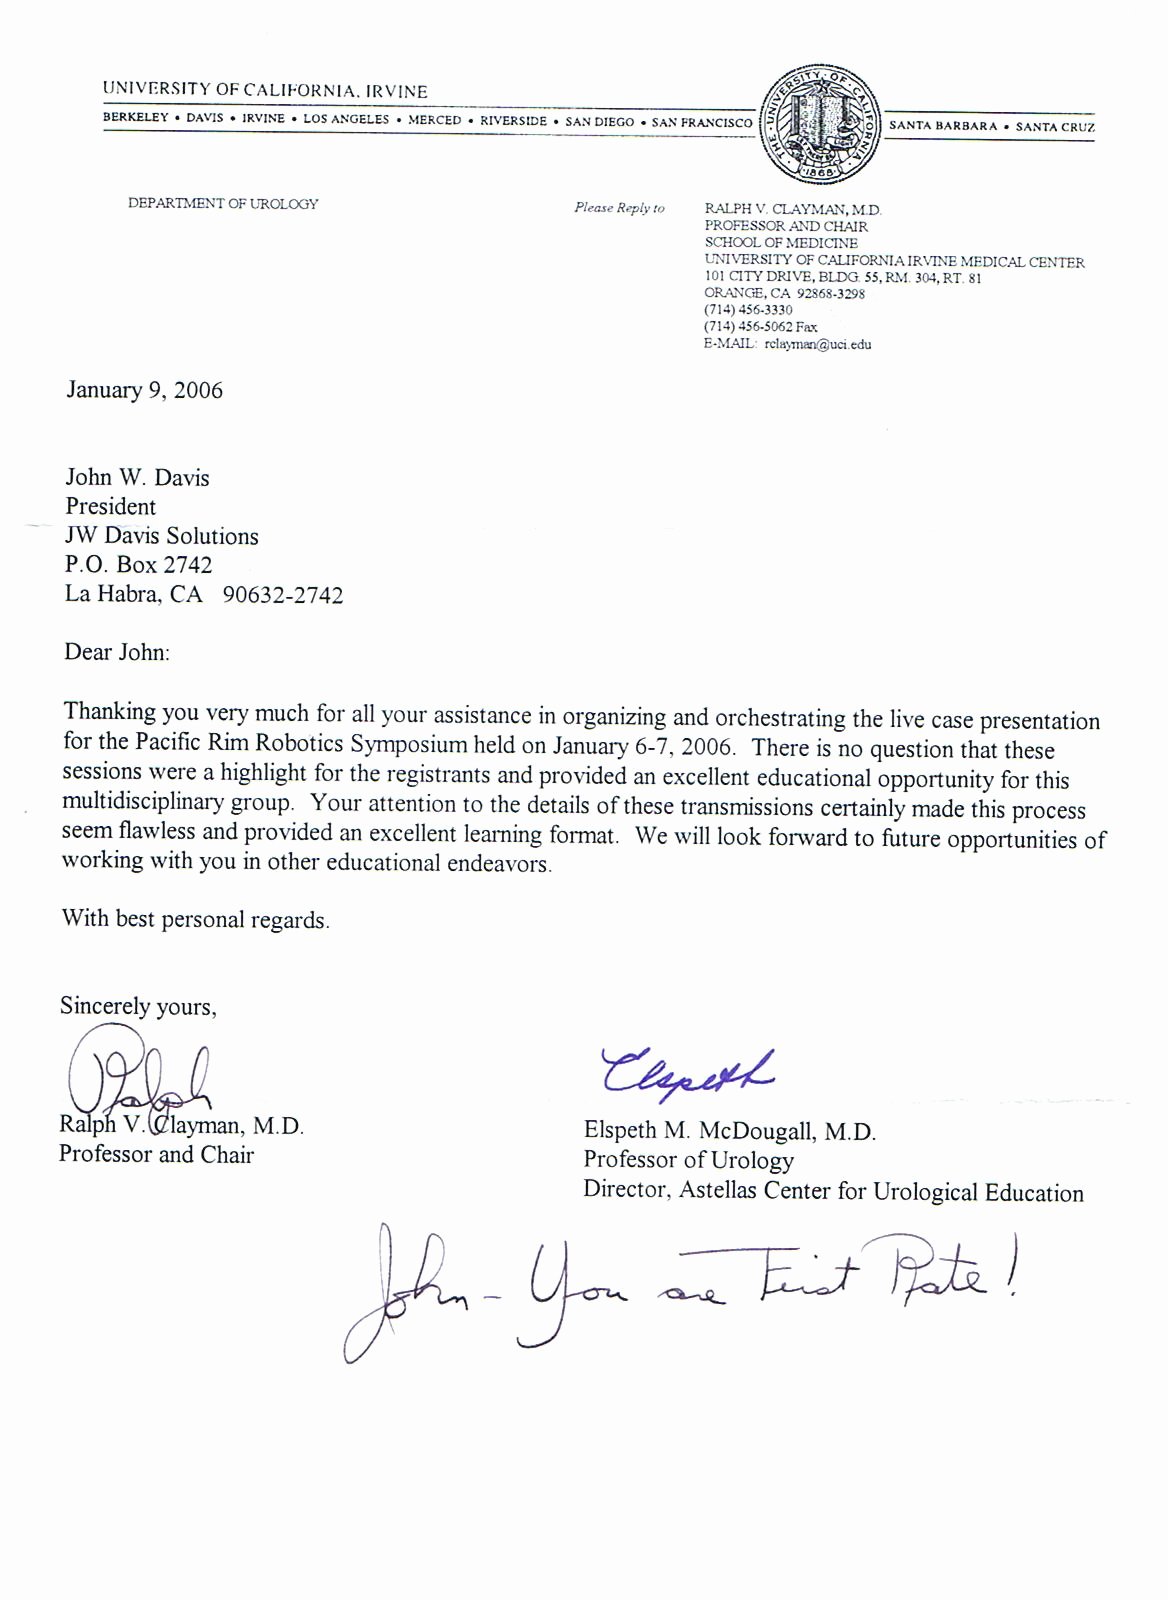 Uc Letter Of Recommendation Luxury Letter From the University Of California Medical Center